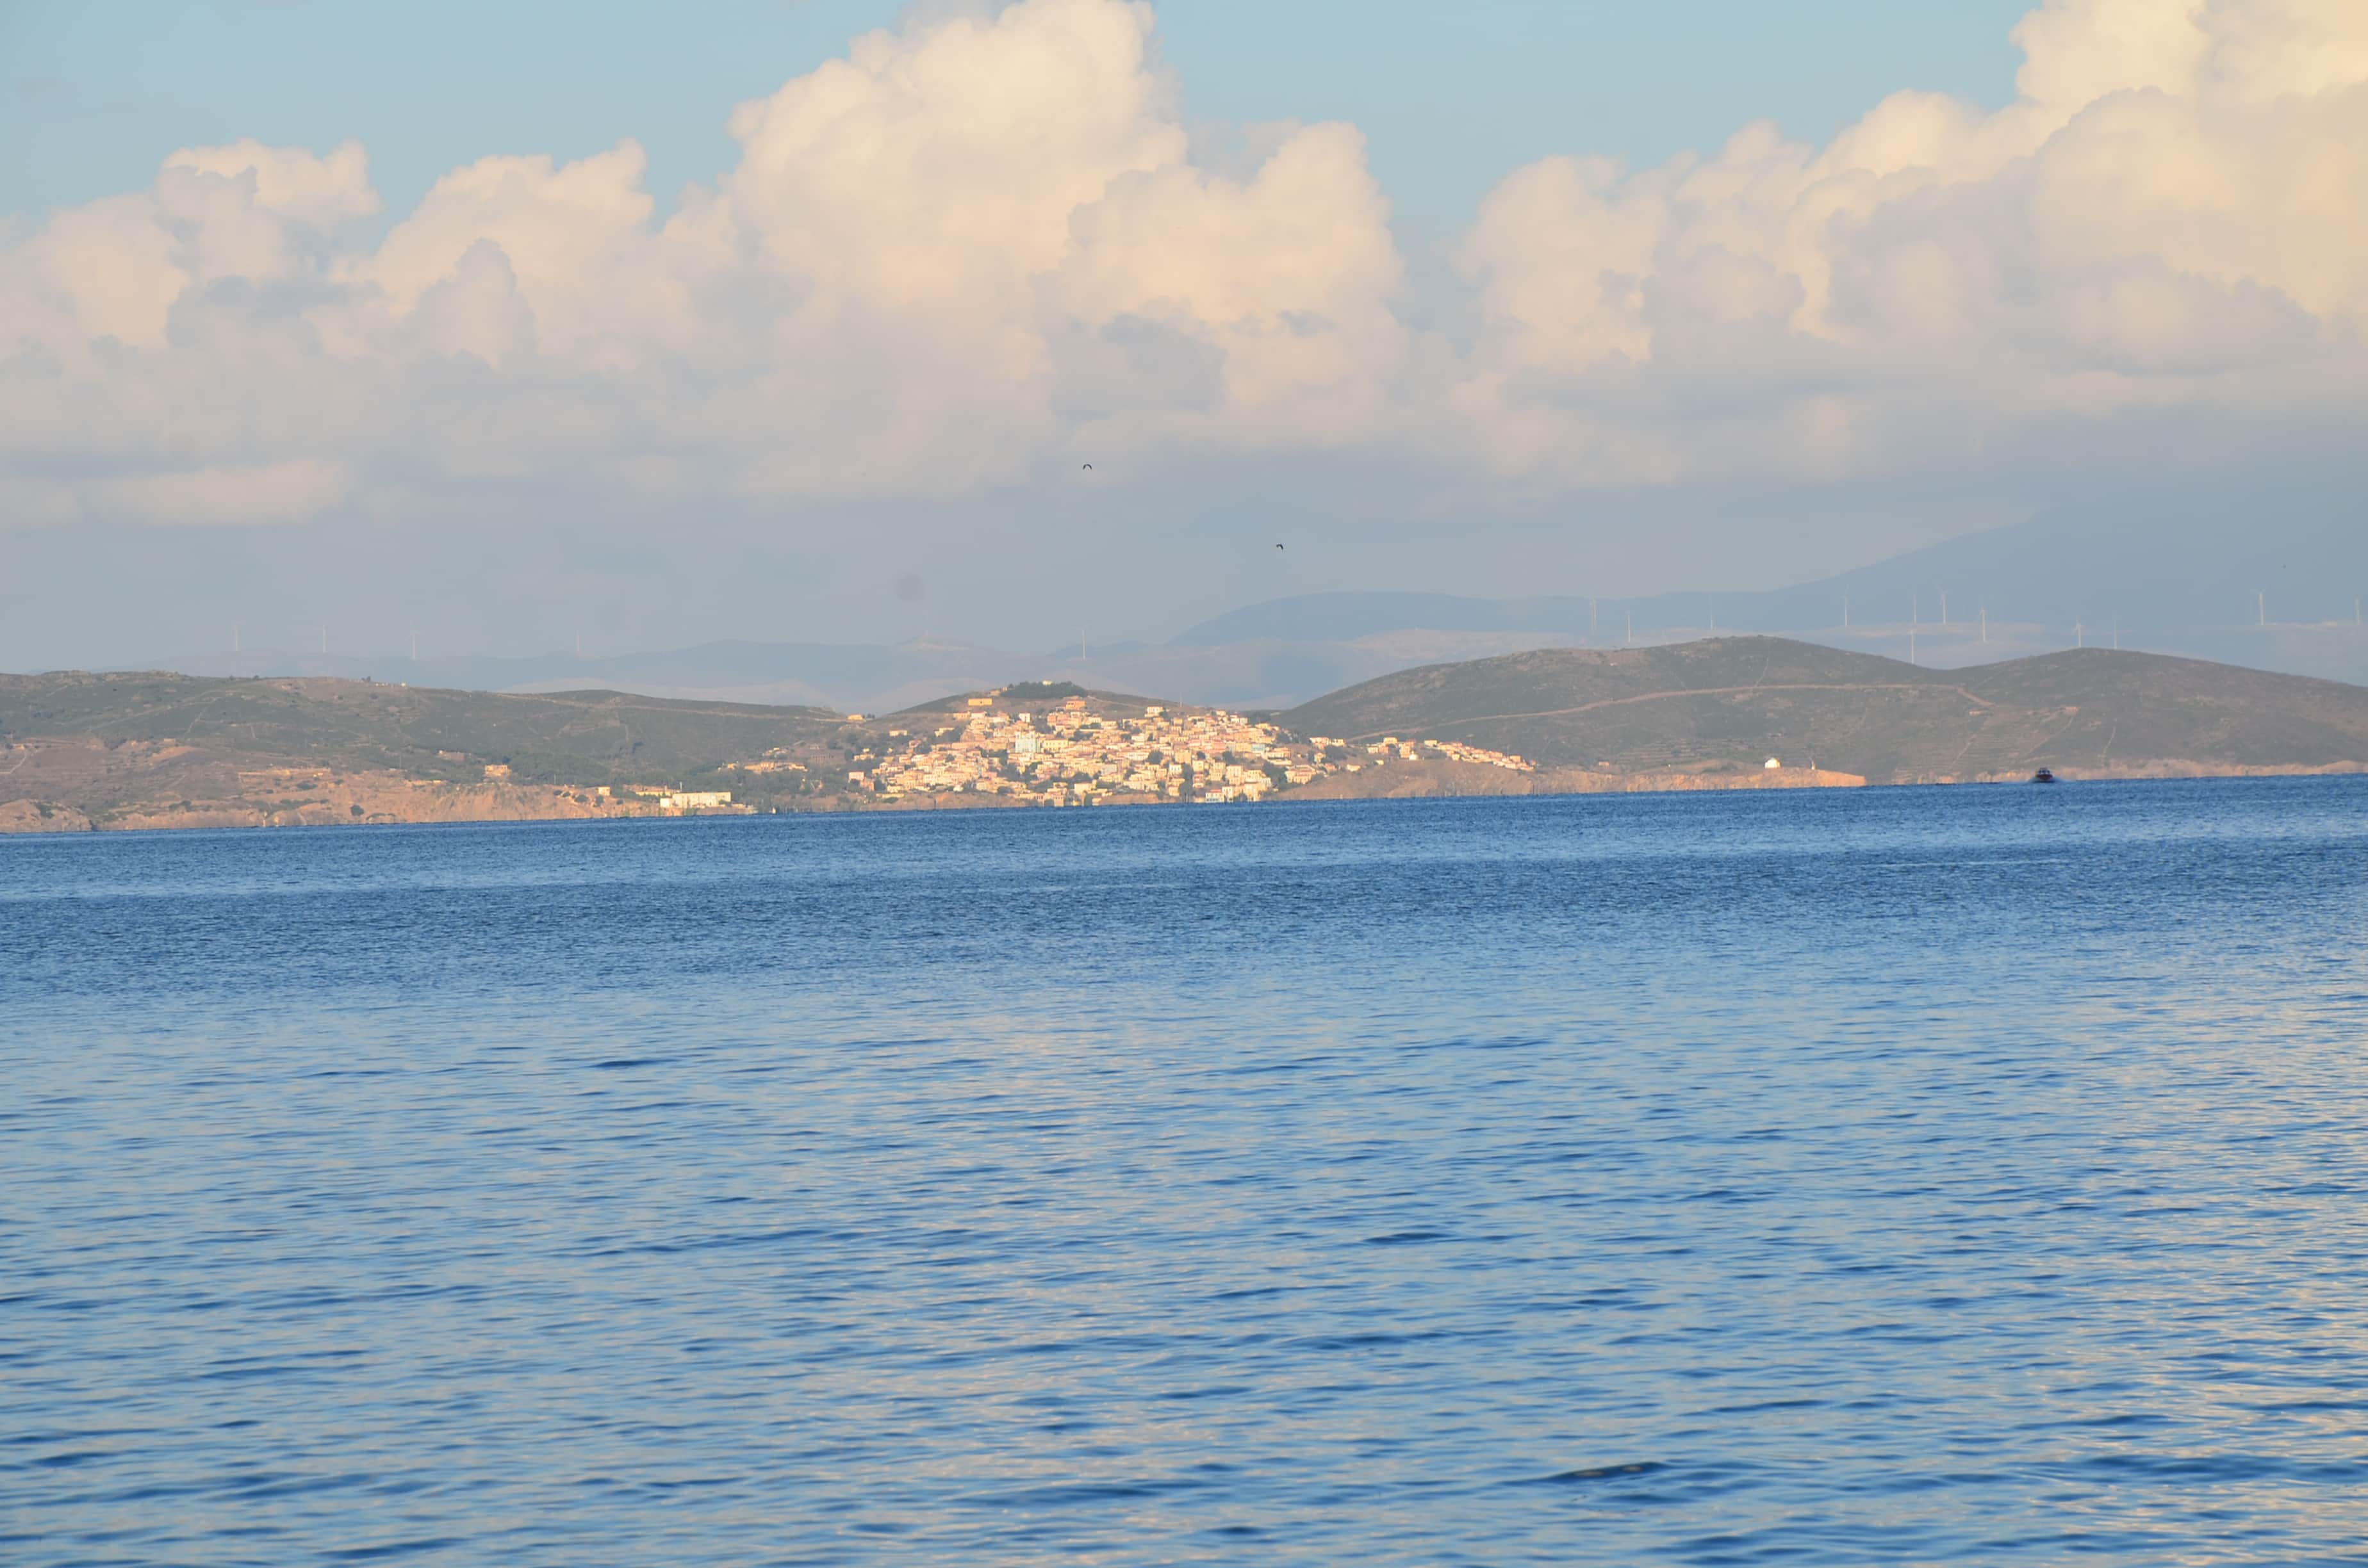 Looking towards Oinousses from Lagkada, Chios, Greece